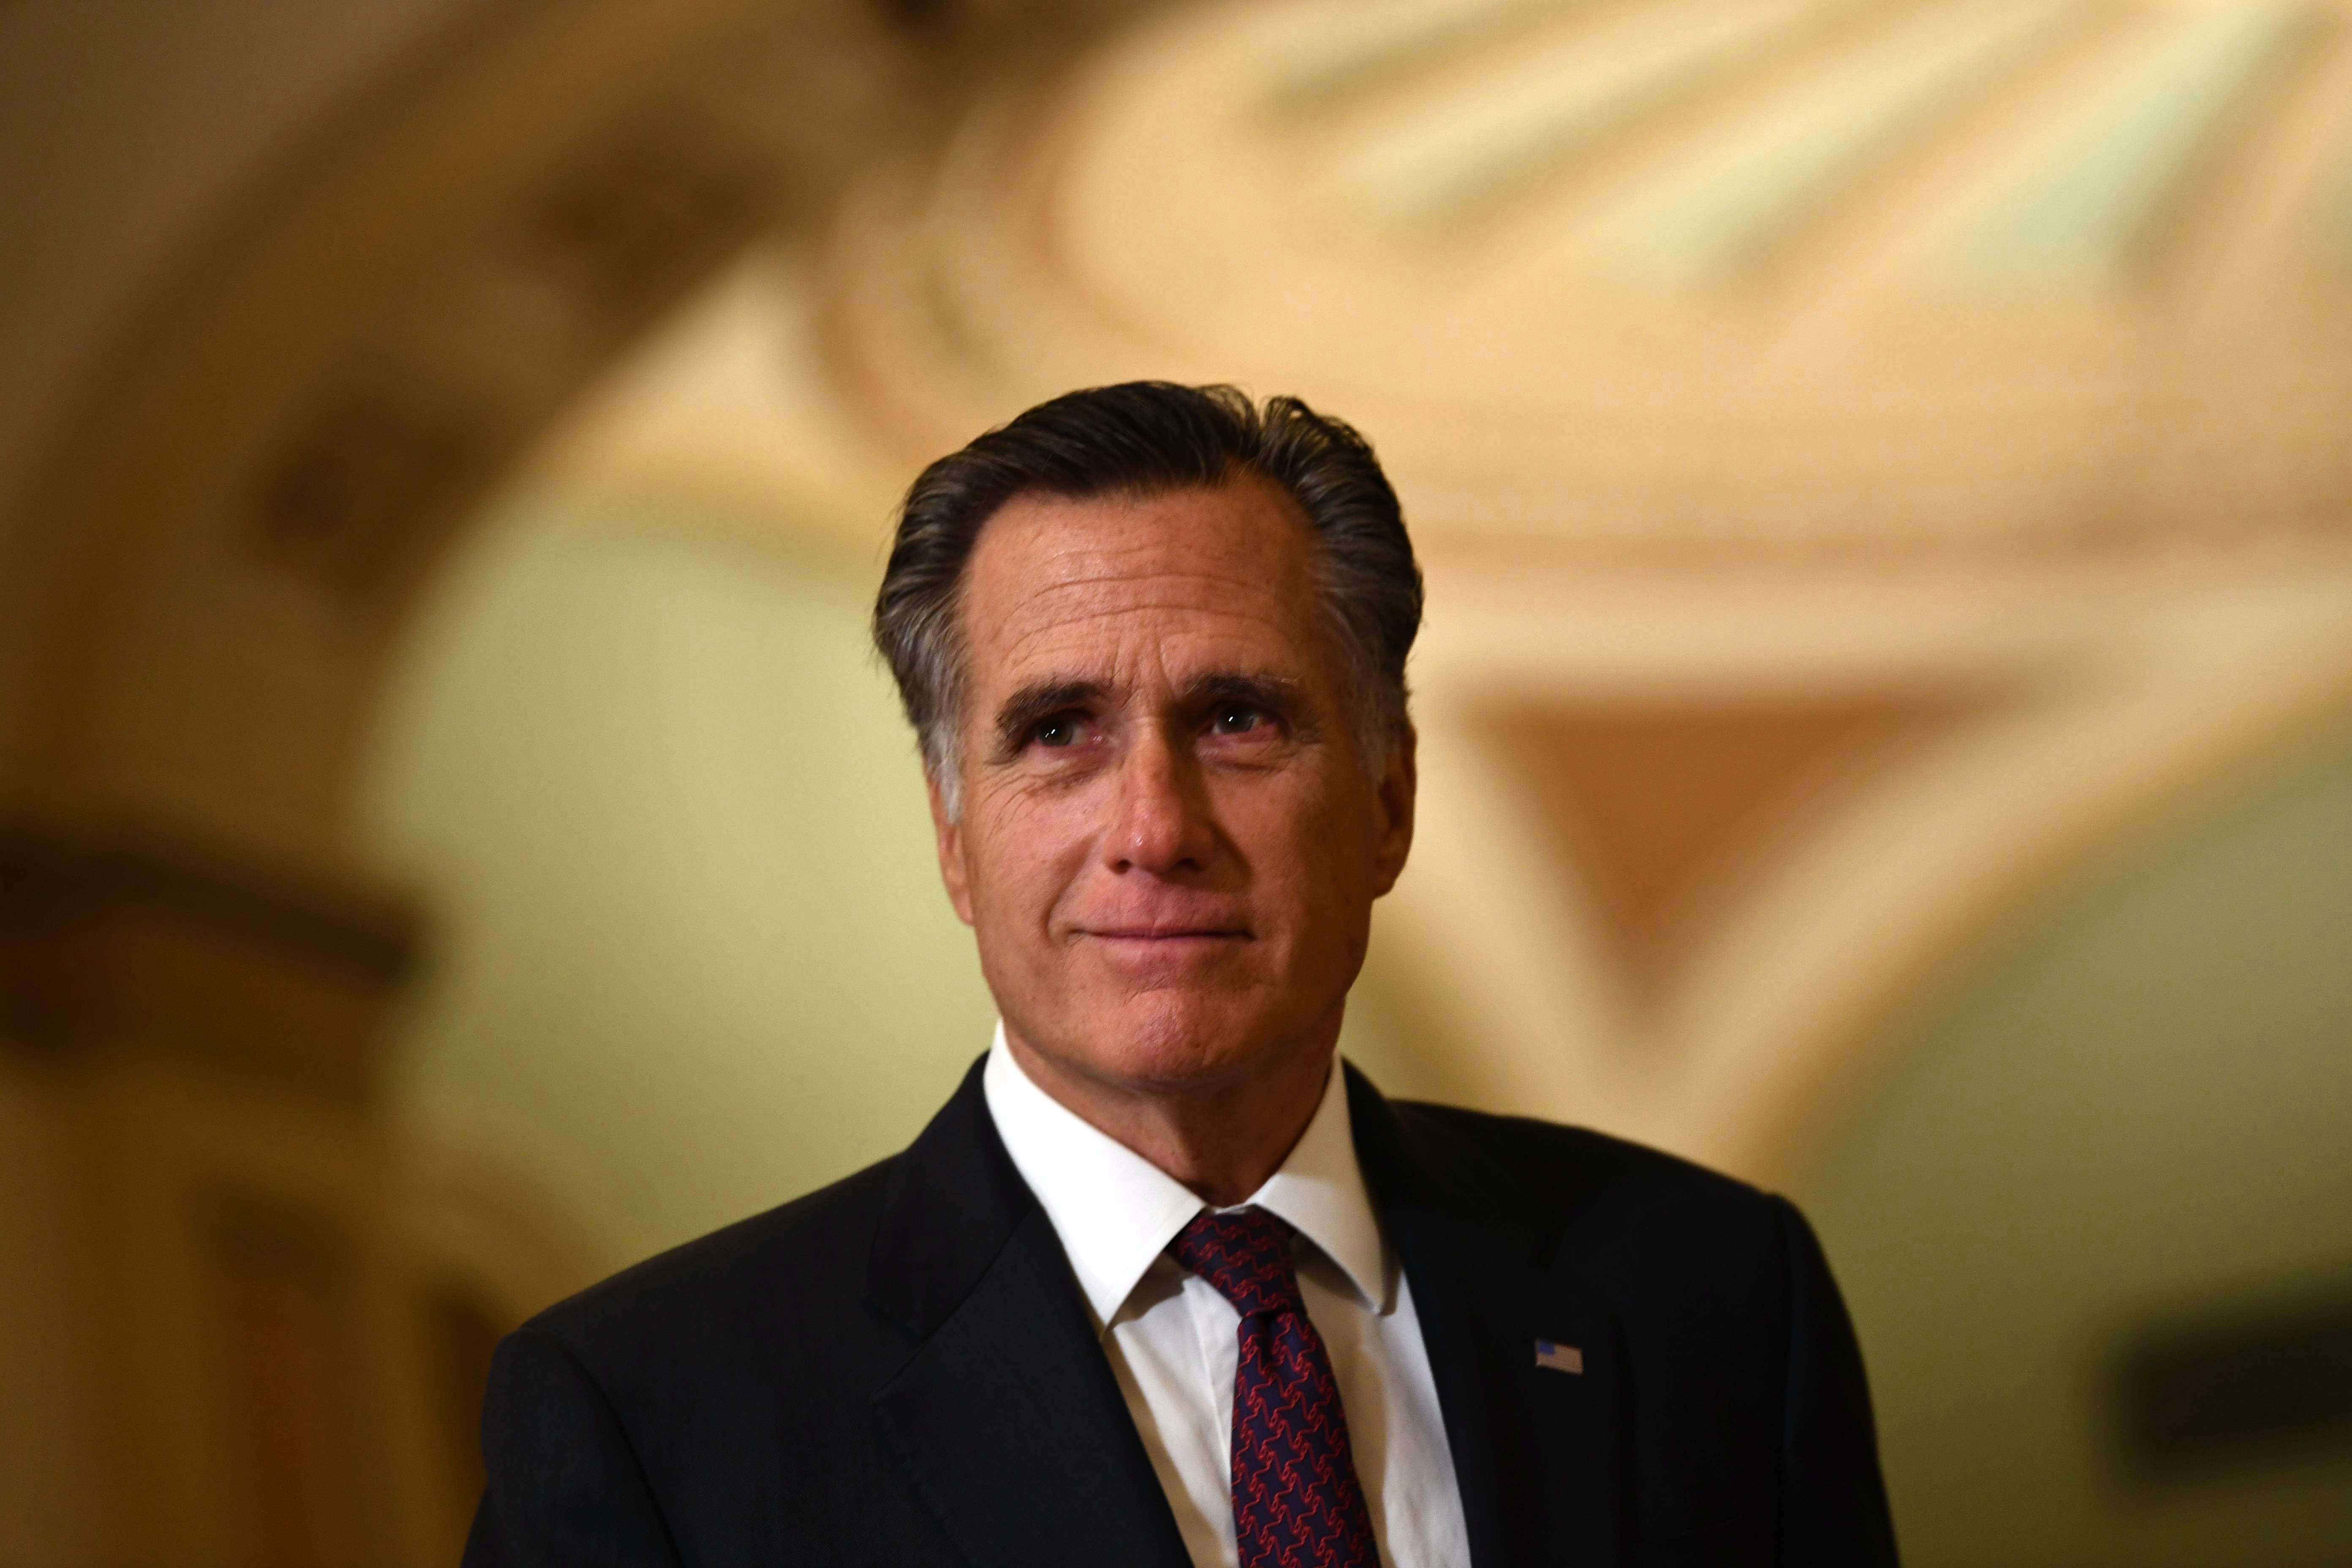 Former Republican presidential candidate Mitt Romney has spoken out against Trump